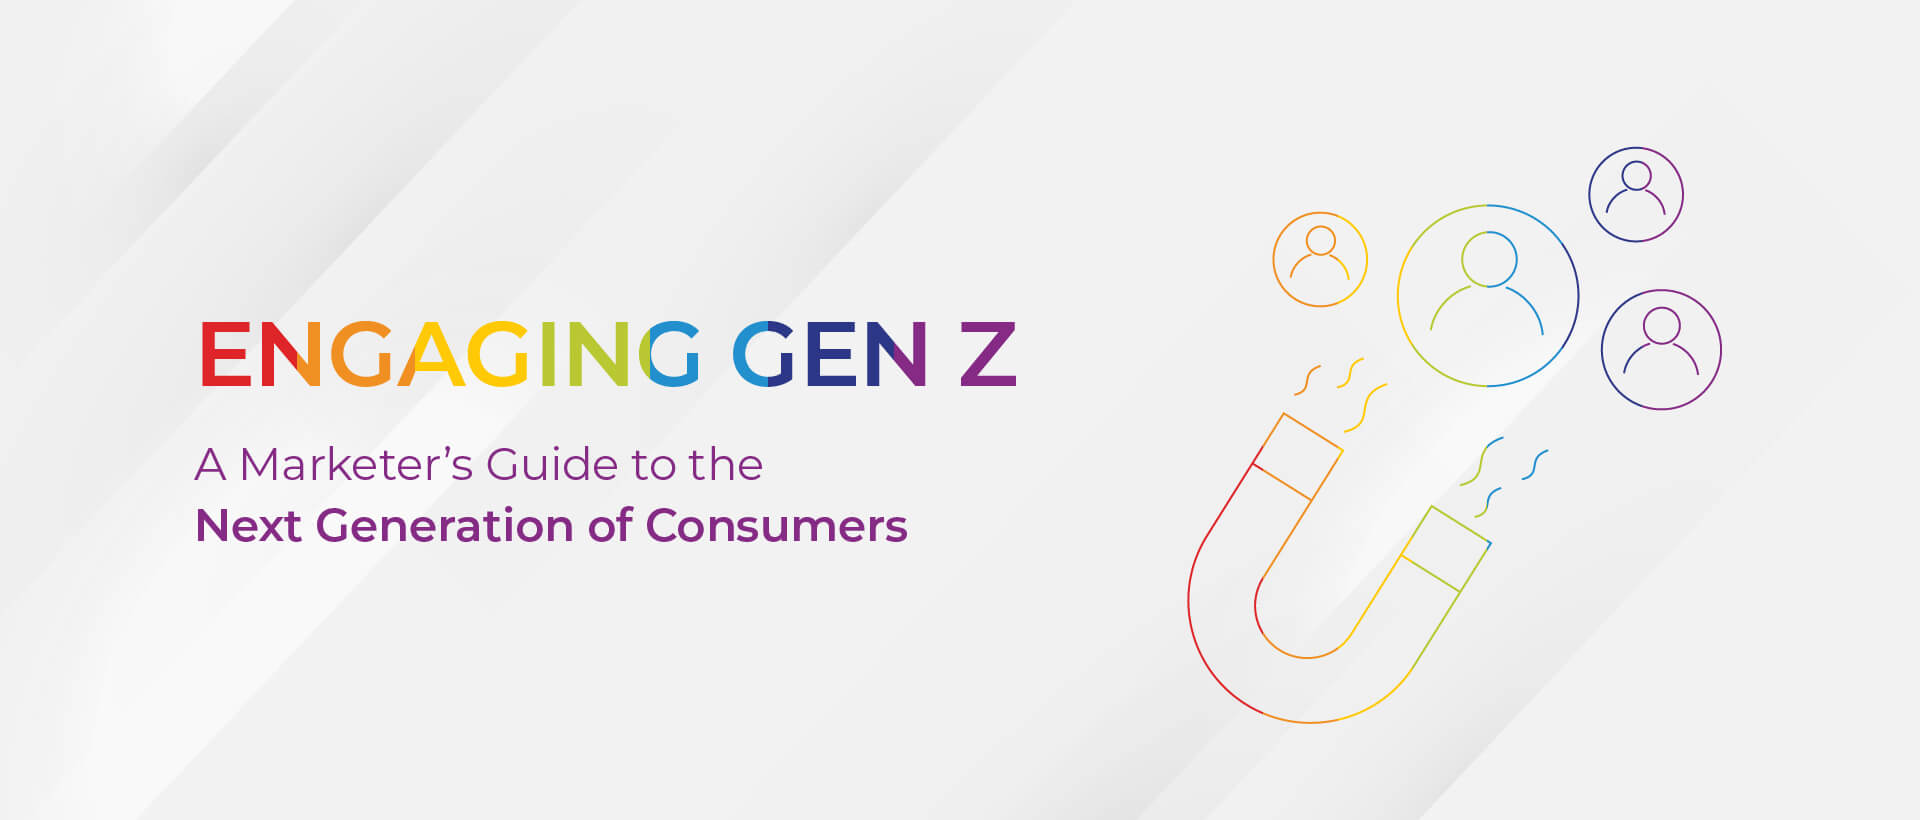 Engaging Gen Z: A Marketer’s Guide to the Next Generation of Consumers